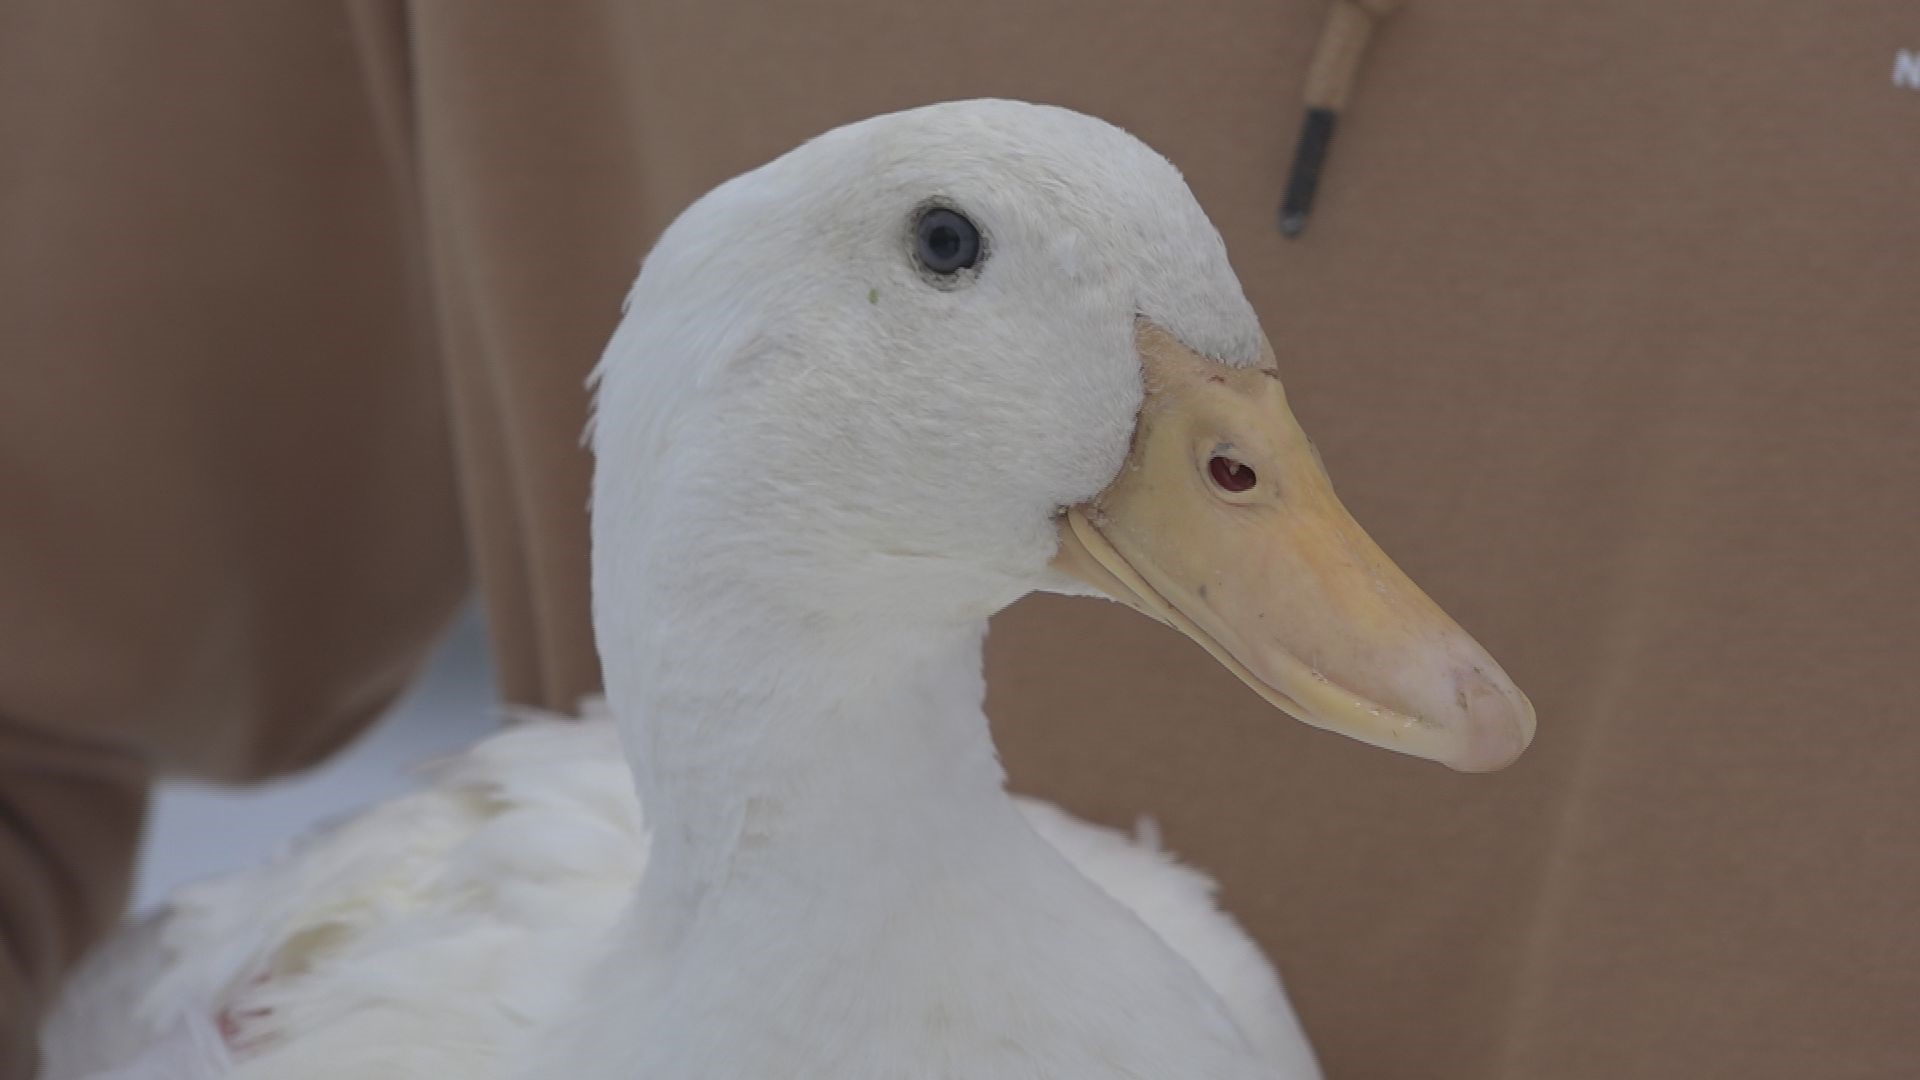 With the weight of snow and grief, Sophia the duck wouldn't have made it through the winter without a companion. The community stepped up to find her a match.